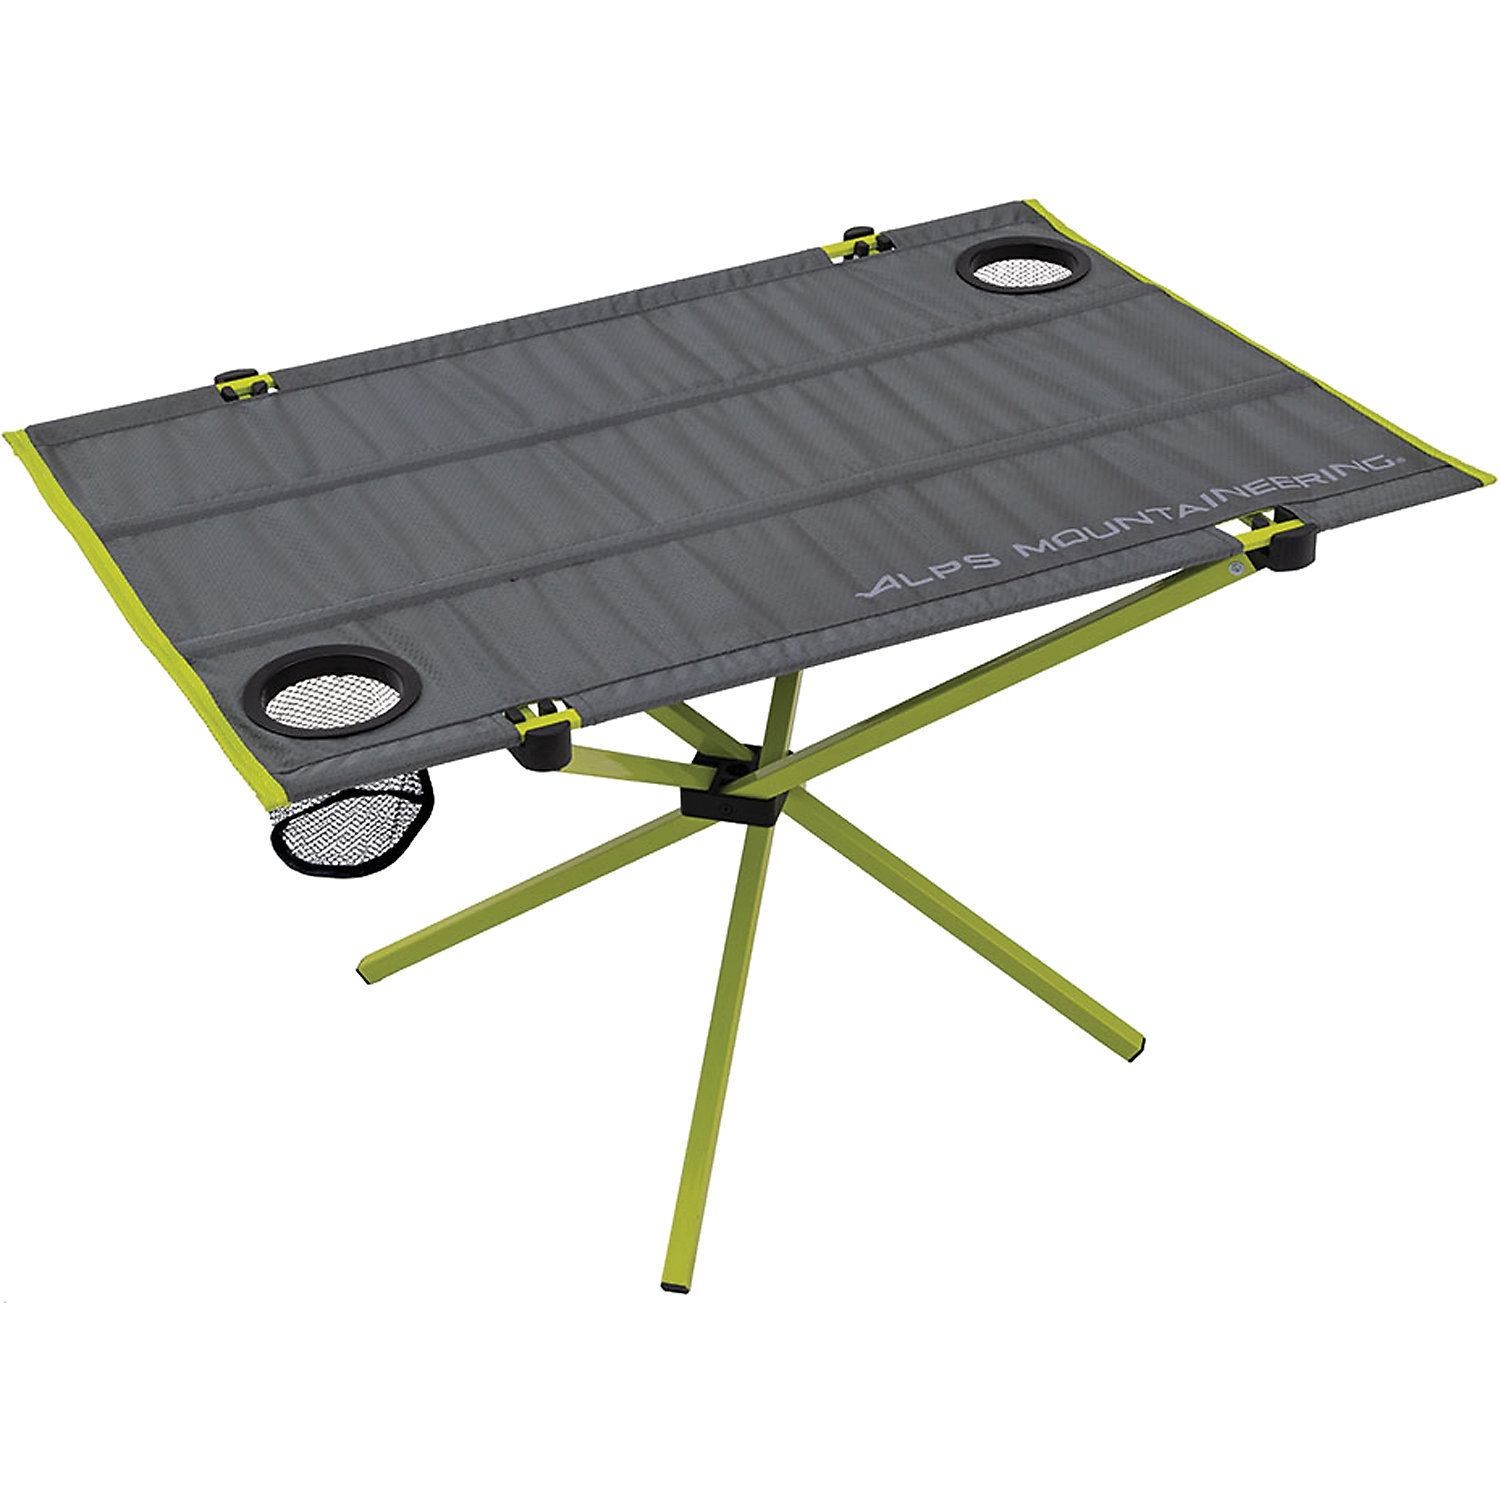 ALPS Mountaineering Simmer Table